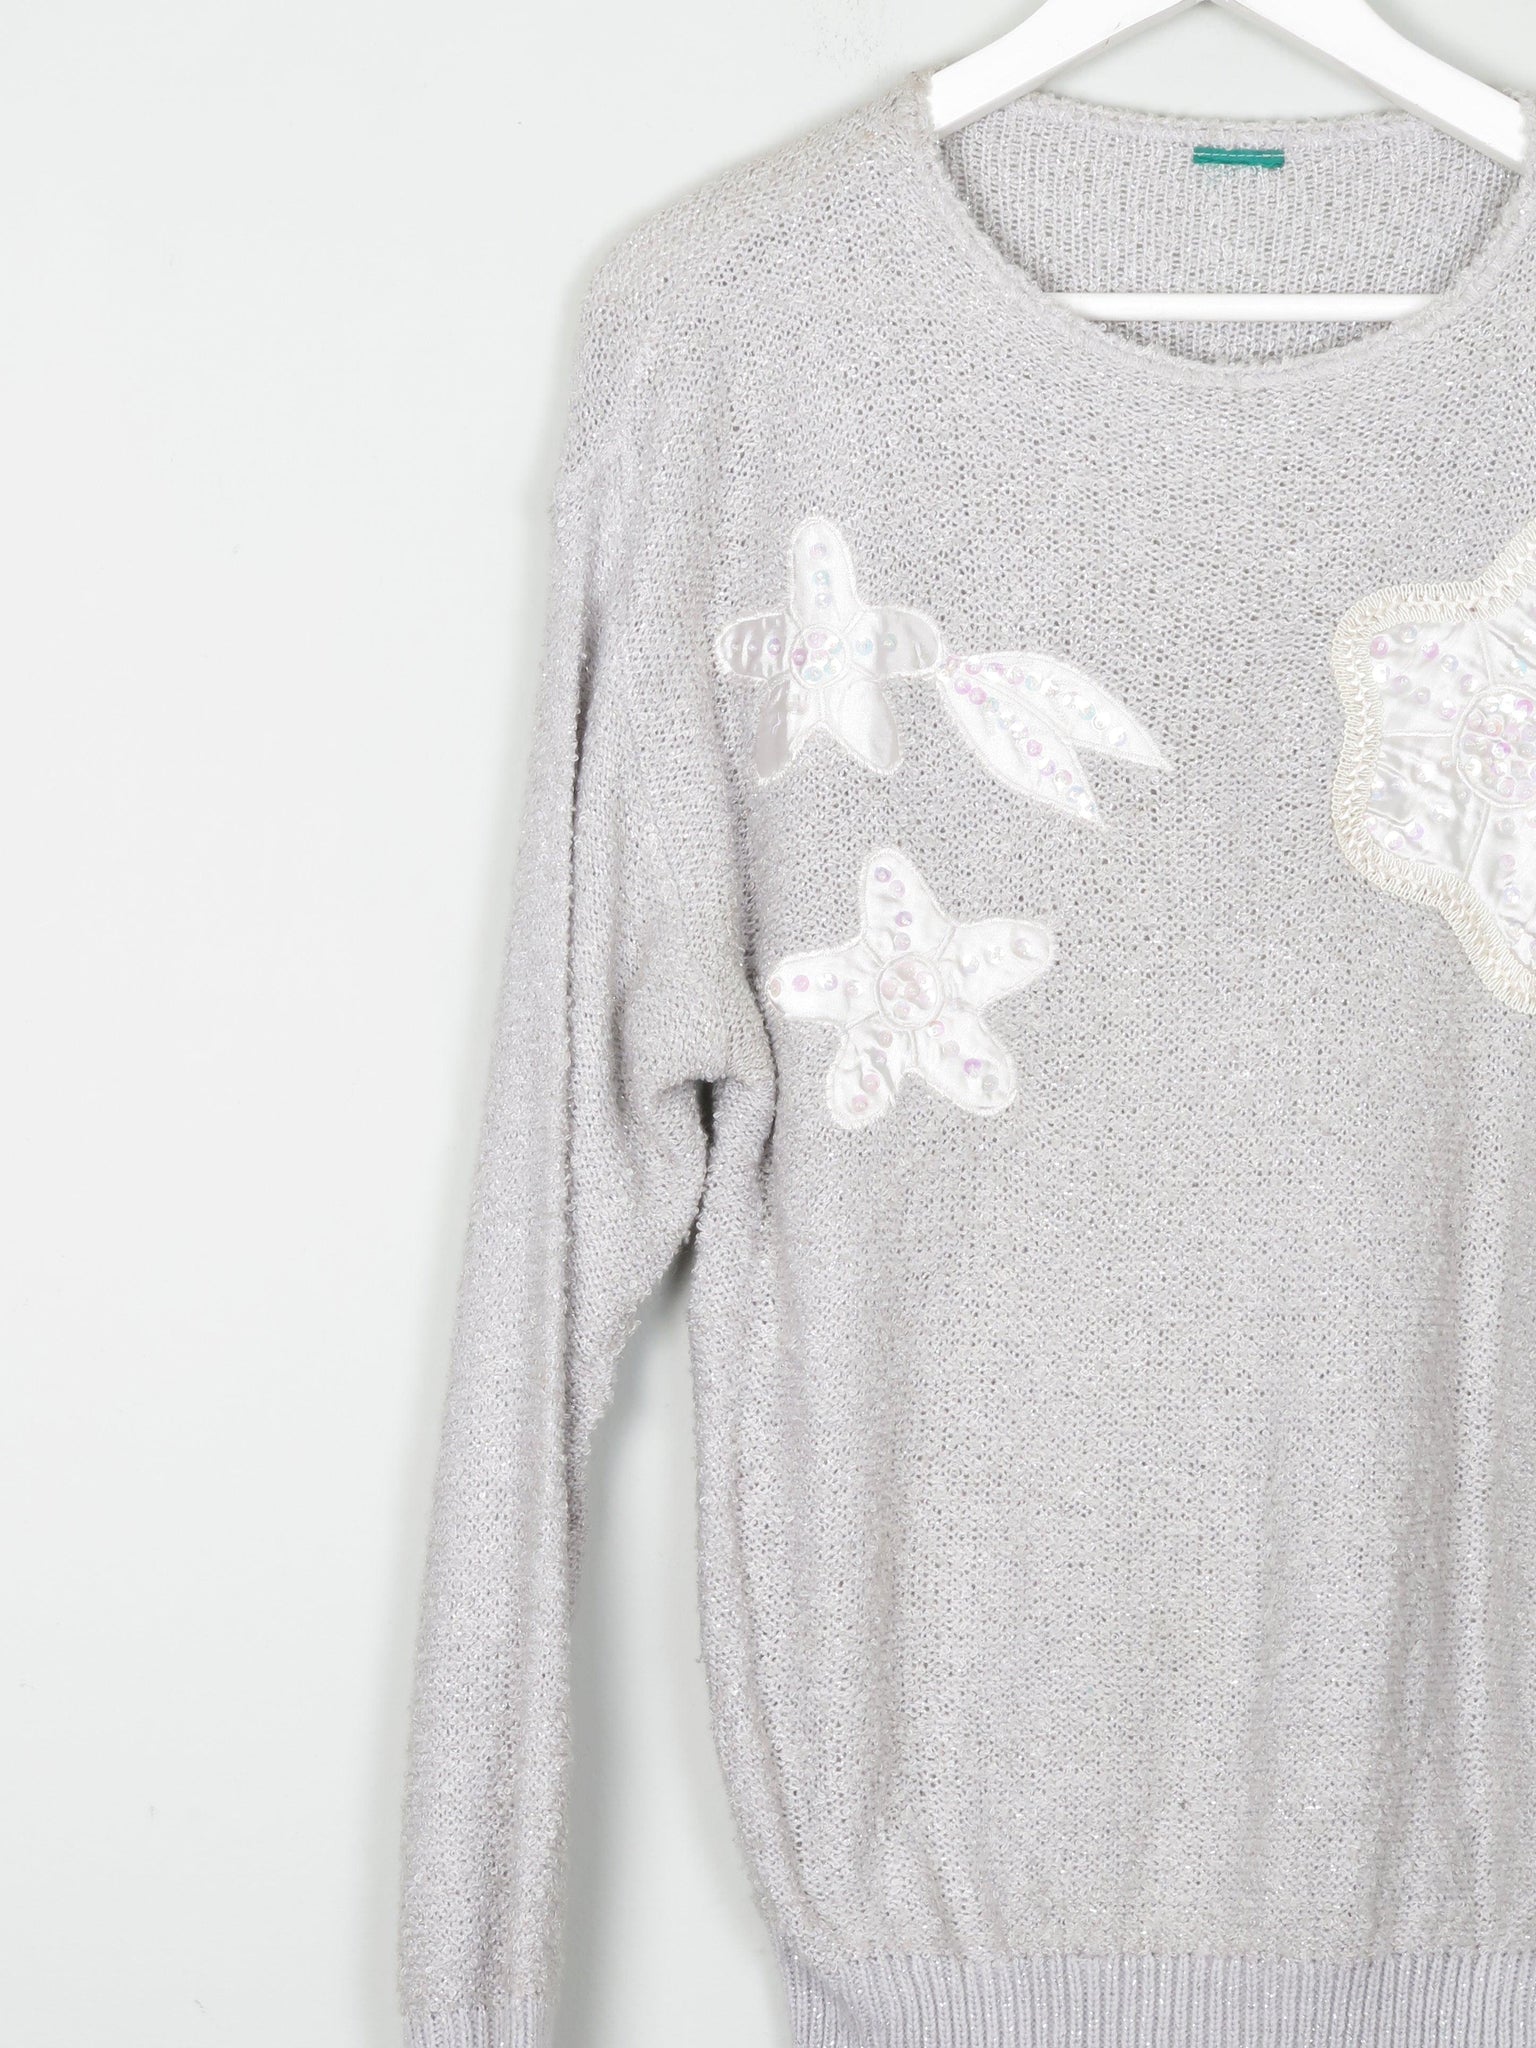 Grey & Silver 1980s Lurex Jumper With Appliqué  S/M - The Harlequin